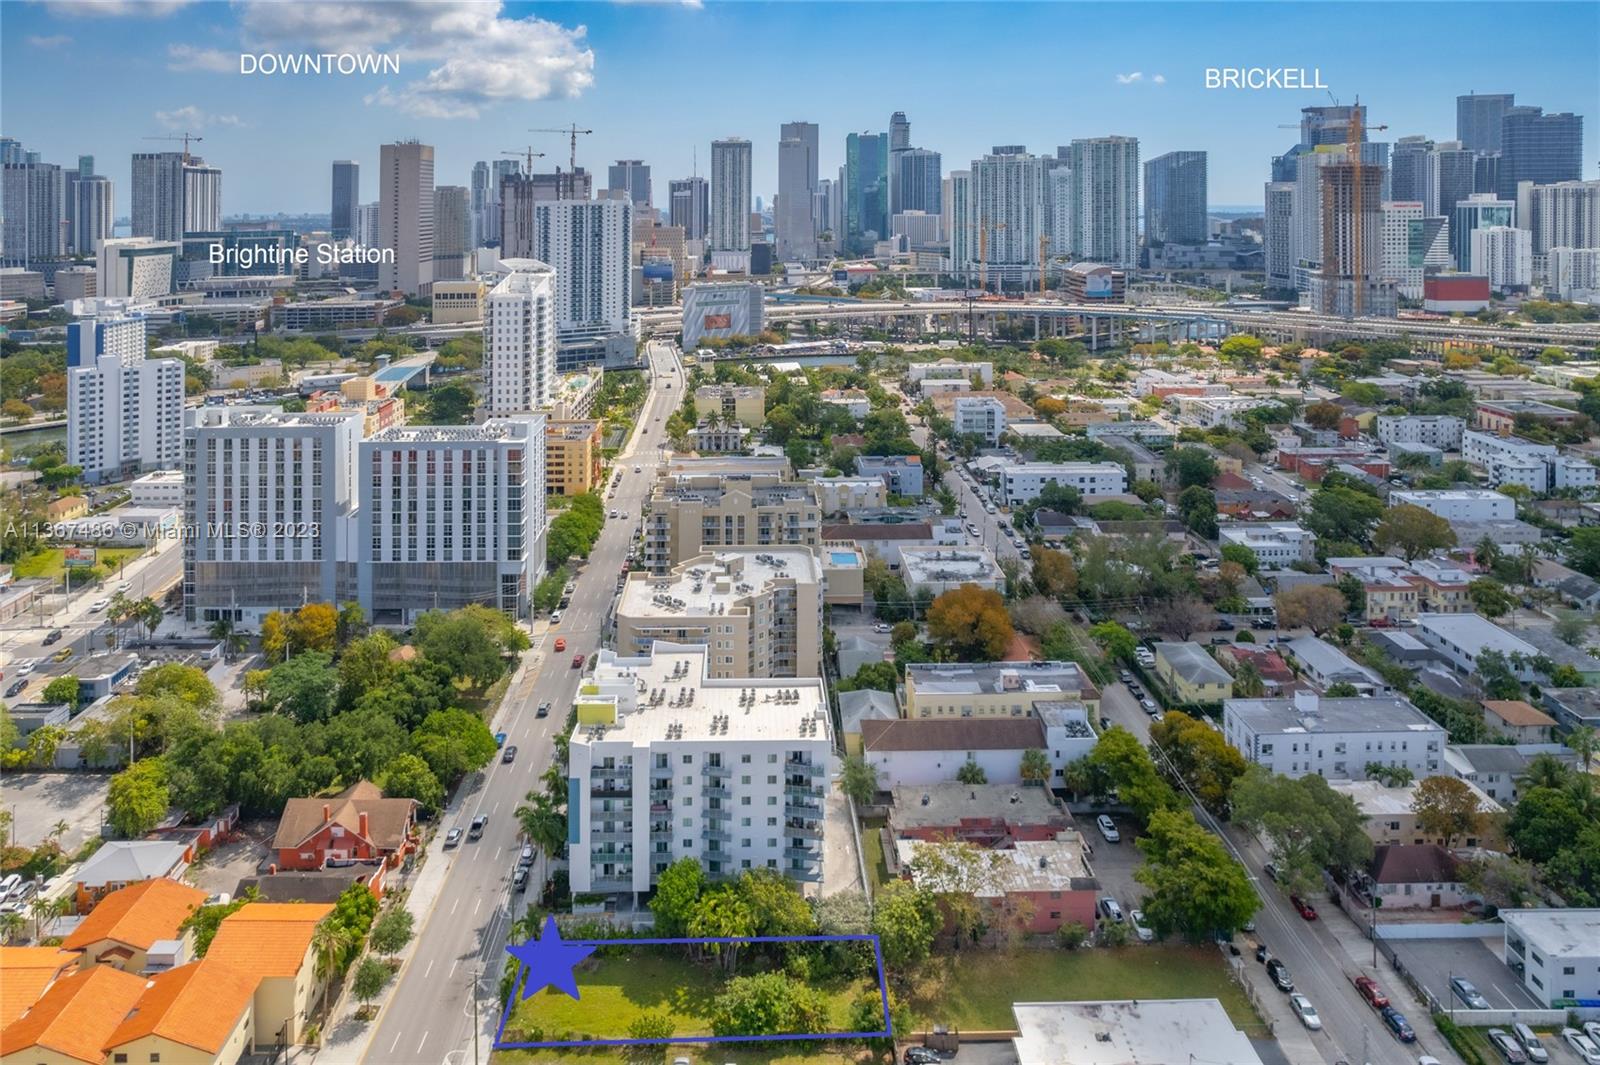 Minutes to Brickell, Downtown, Edgewater, Gables, Grove and more.